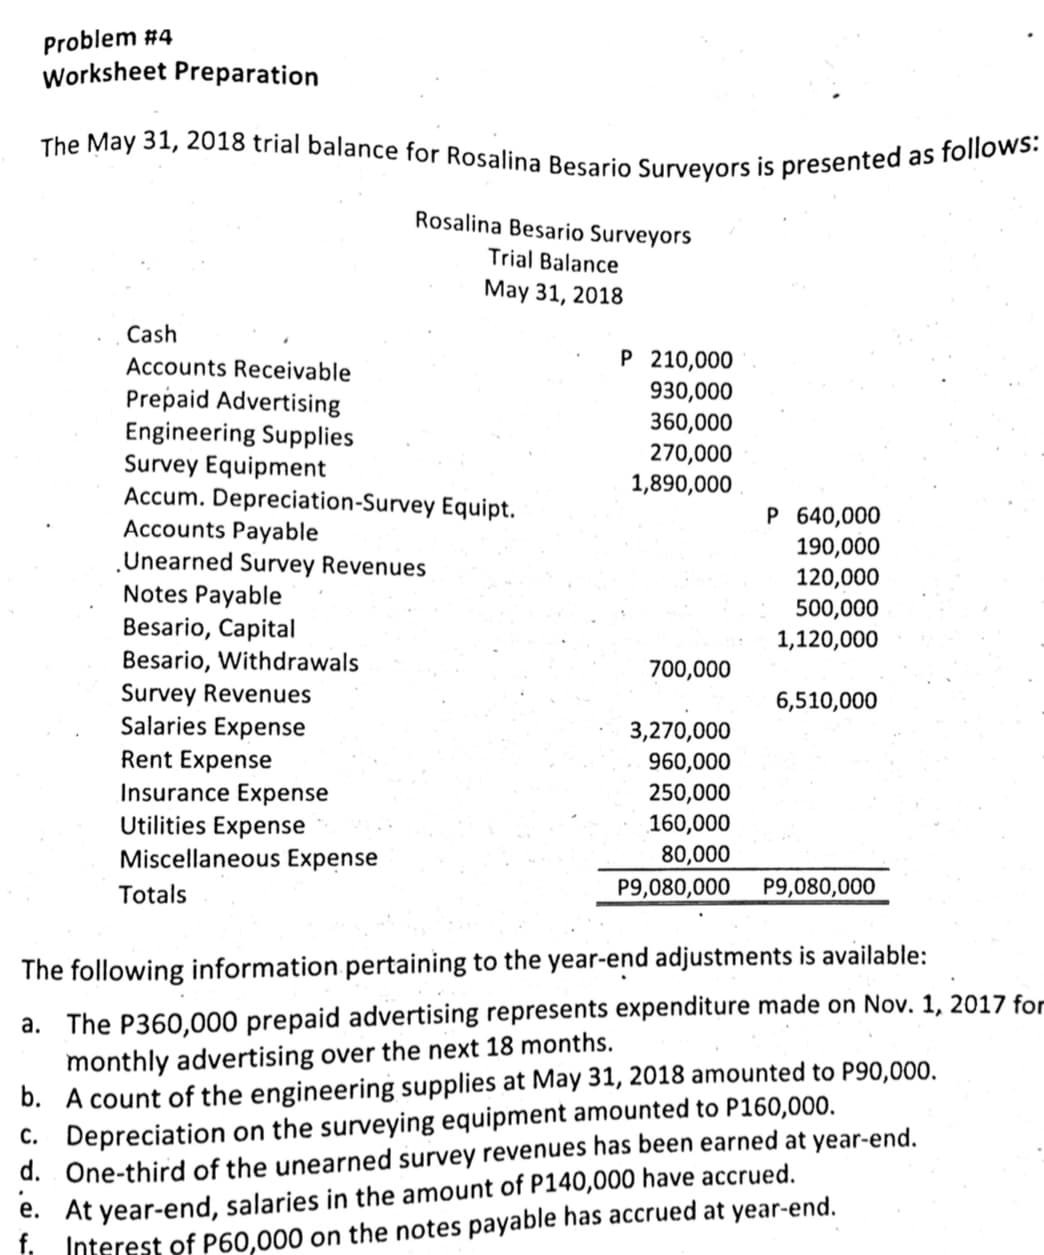 The May 31, 2018 trial balance for Rosalina Besario Surveyors is presented as follows:
Problem #4
Worksheet Preparation
Rosalina Besario Surveyors
Trial Balance
May 31, 2018
Cash
Accounts Receivable
P 210,000
930,000
360,000
270,000
1,890,000
Prepaid Advertising
Engineering Supplies
Survey Equipment
Accum. Depreciation-Survey Equipt.
Accounts Payable
Unearned Survey Revenues
Notes Payable
Besario, Capital
Besario, Withdrawals
Survey Revenues
Salaries Expense
P 640,000
190,000
120,000
500,000
1,120,000
700,000
6,510,000
3,270,000
Rent Expense
Insurance Expense
Utilities Expense
Miscellaneous Expense
960,000
250,000
160,000
80,000
Totals
P9,080,000
P9,080,000
The following information pertaining to the year-end adjustments is available:
a. The P360,000 prepaid advertising represents expenditure made on Nov. 1, 2017 for
monthly advertising over the next 18 months.
b. A count of the engineering supplies at May 31, 2018 amounted to P90,000.
C. Depreciation on the surveying equipment amounted to P160,000.
d. One-third of the unearned survey revenues has been earned at year-end.
e. At year-end, salaries in the amount of P140,000 have accrued.
i Interest of P60,000 on the notes payable has accrued at year-end.
